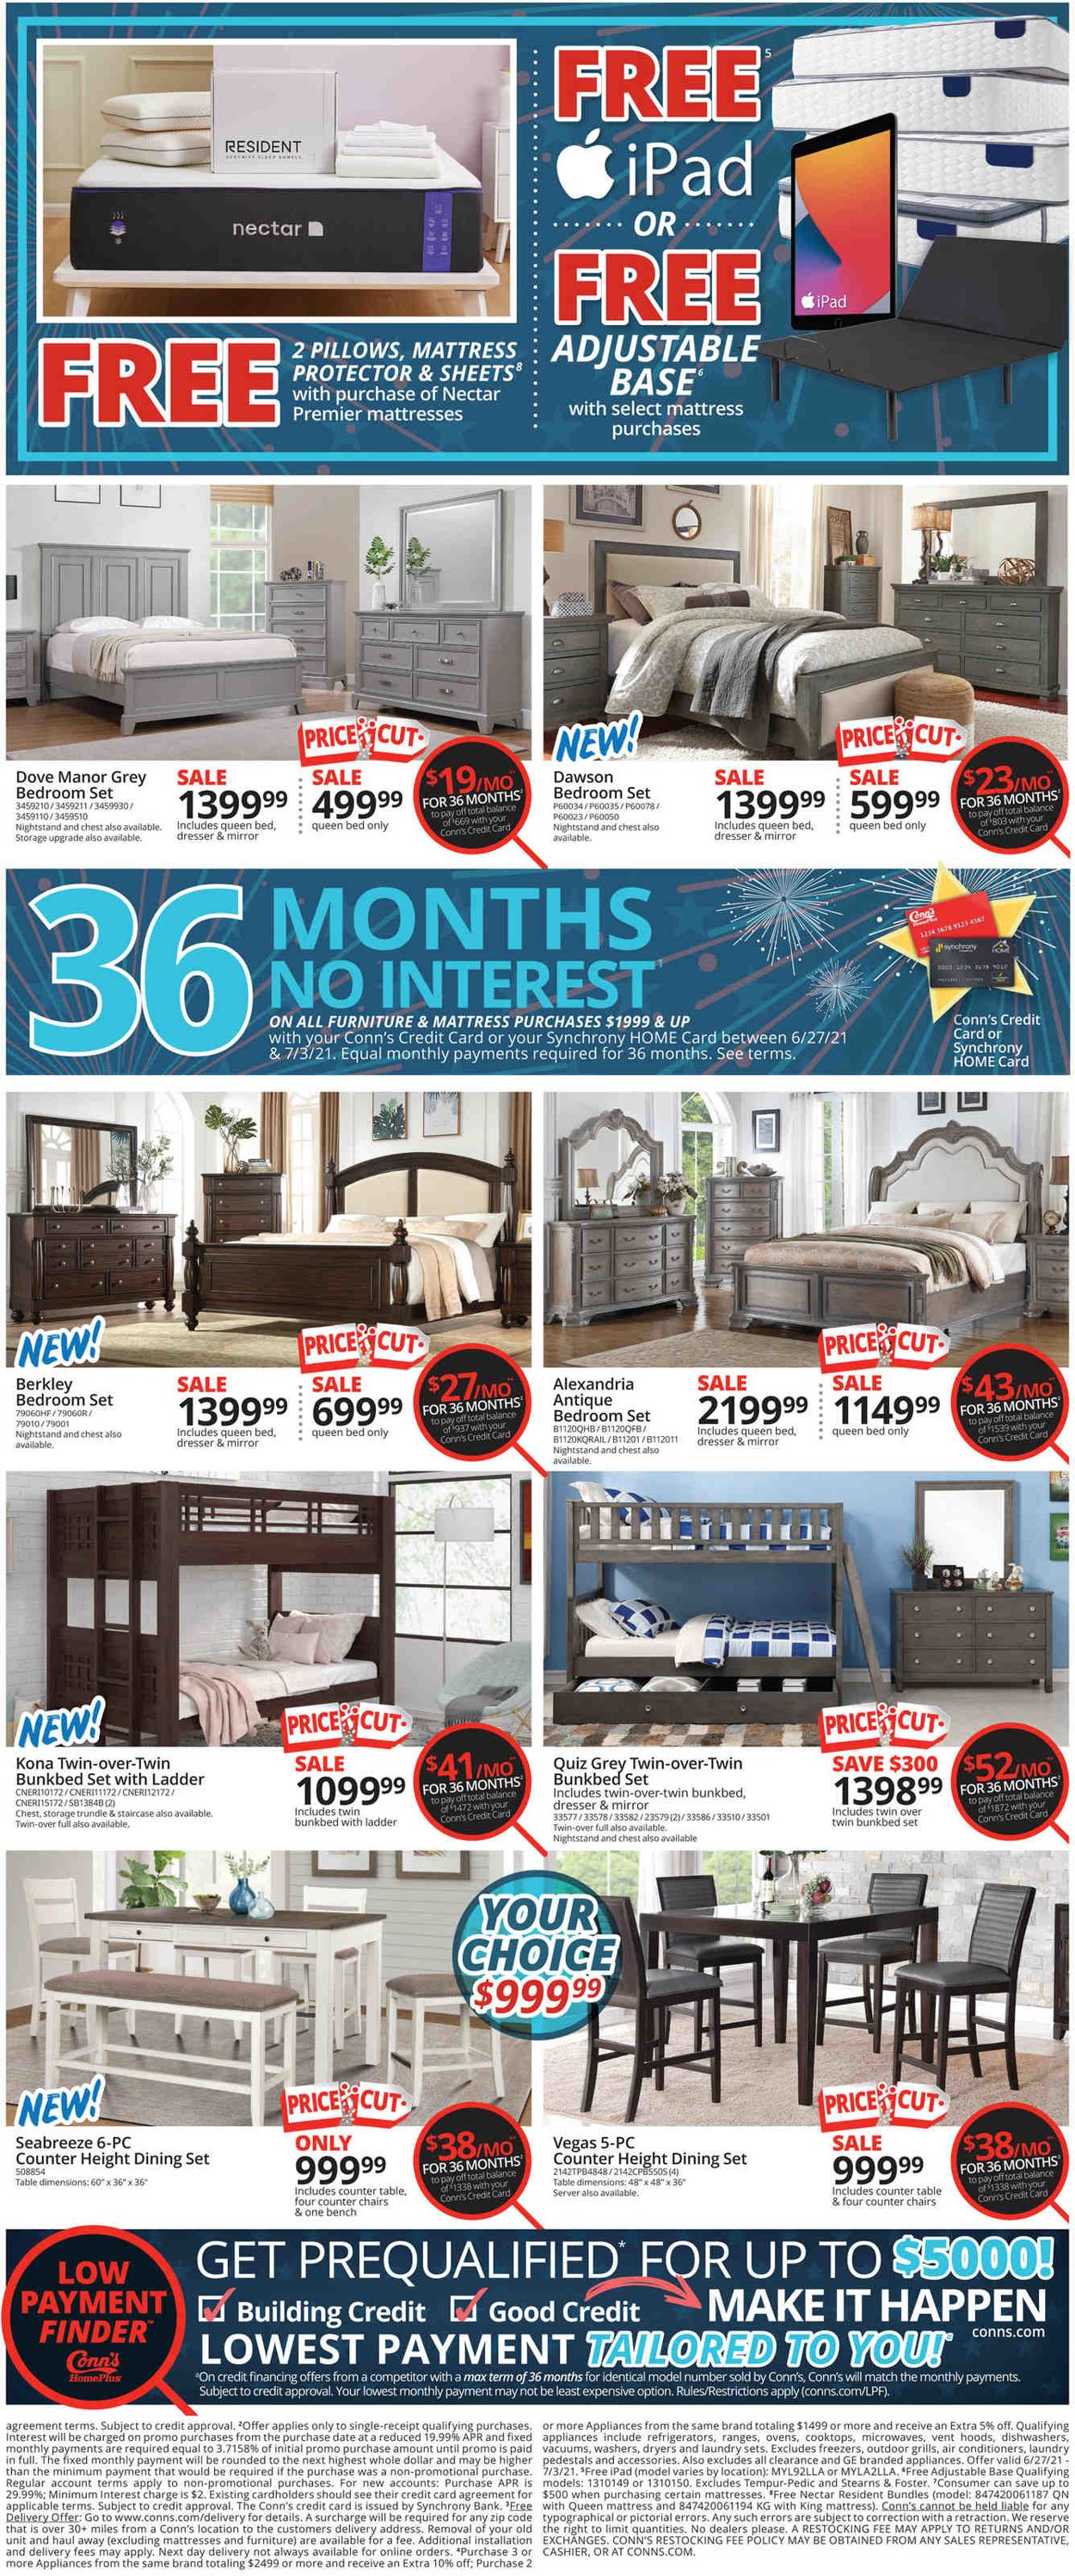 Conn's Home Plus Weekly Ad Circular - valid 06/27-07/03/2021 (Page 3)